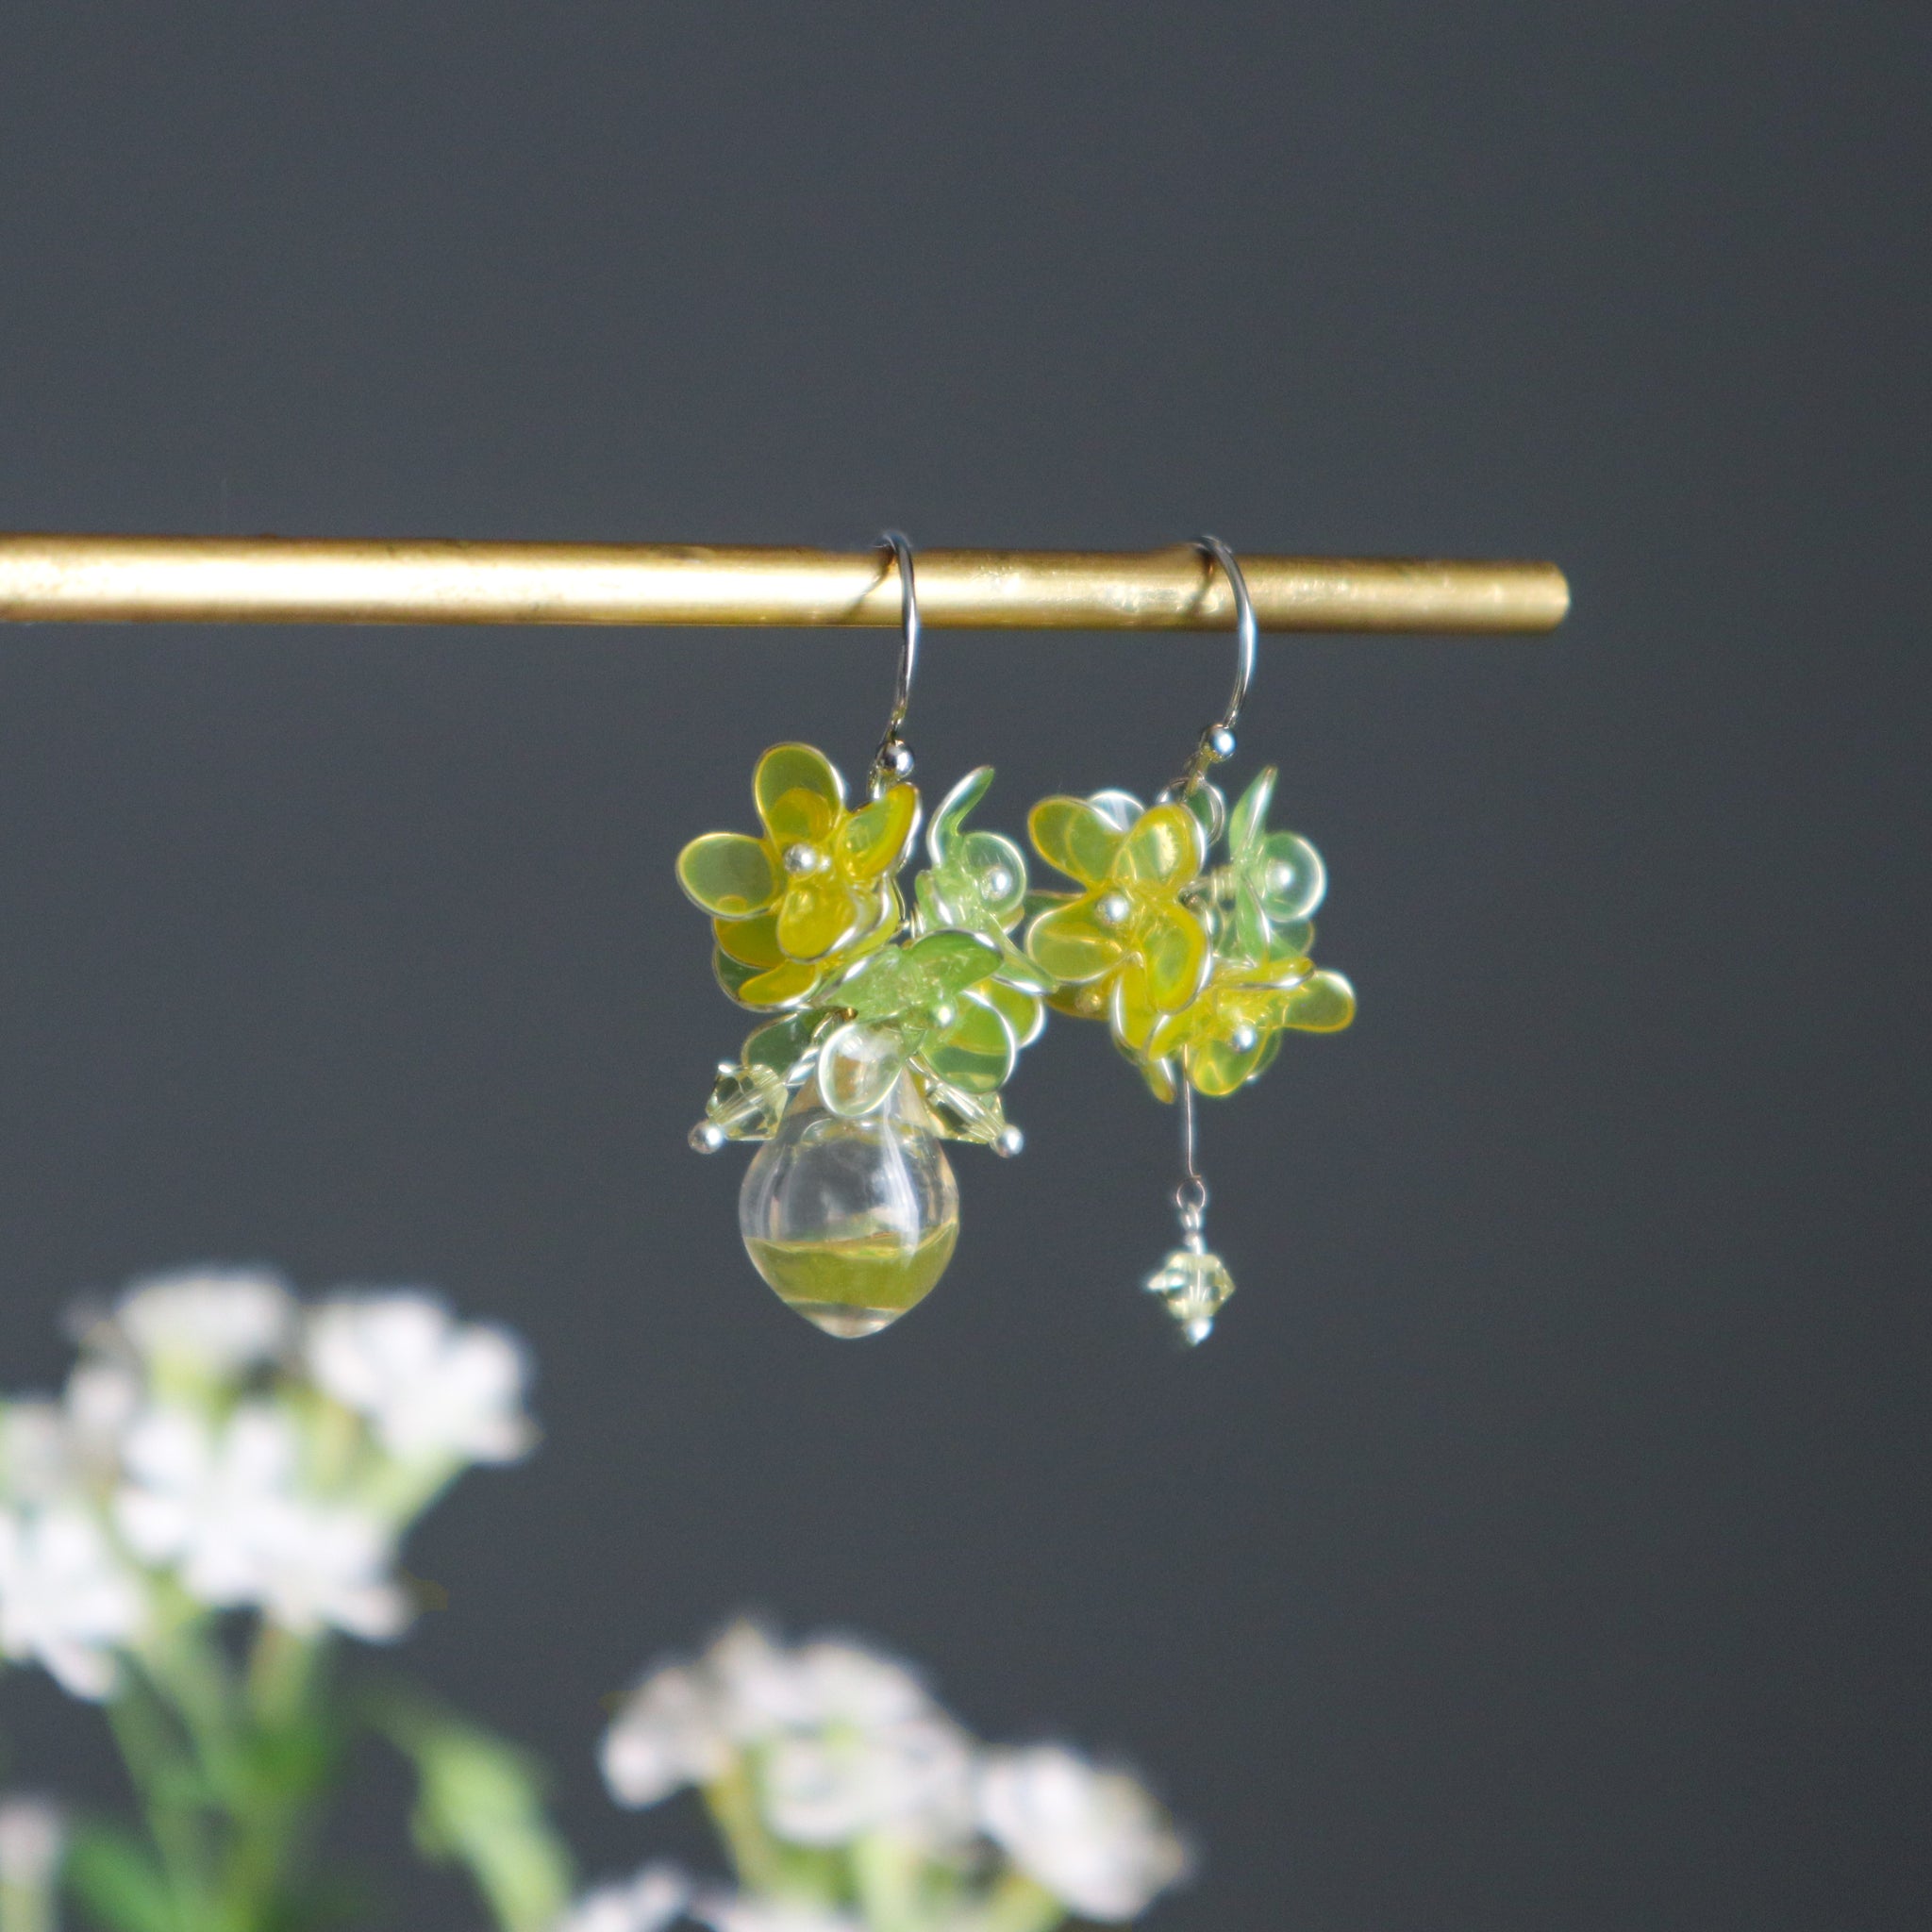 Vase aroma earrings with the scent of rape blossoms